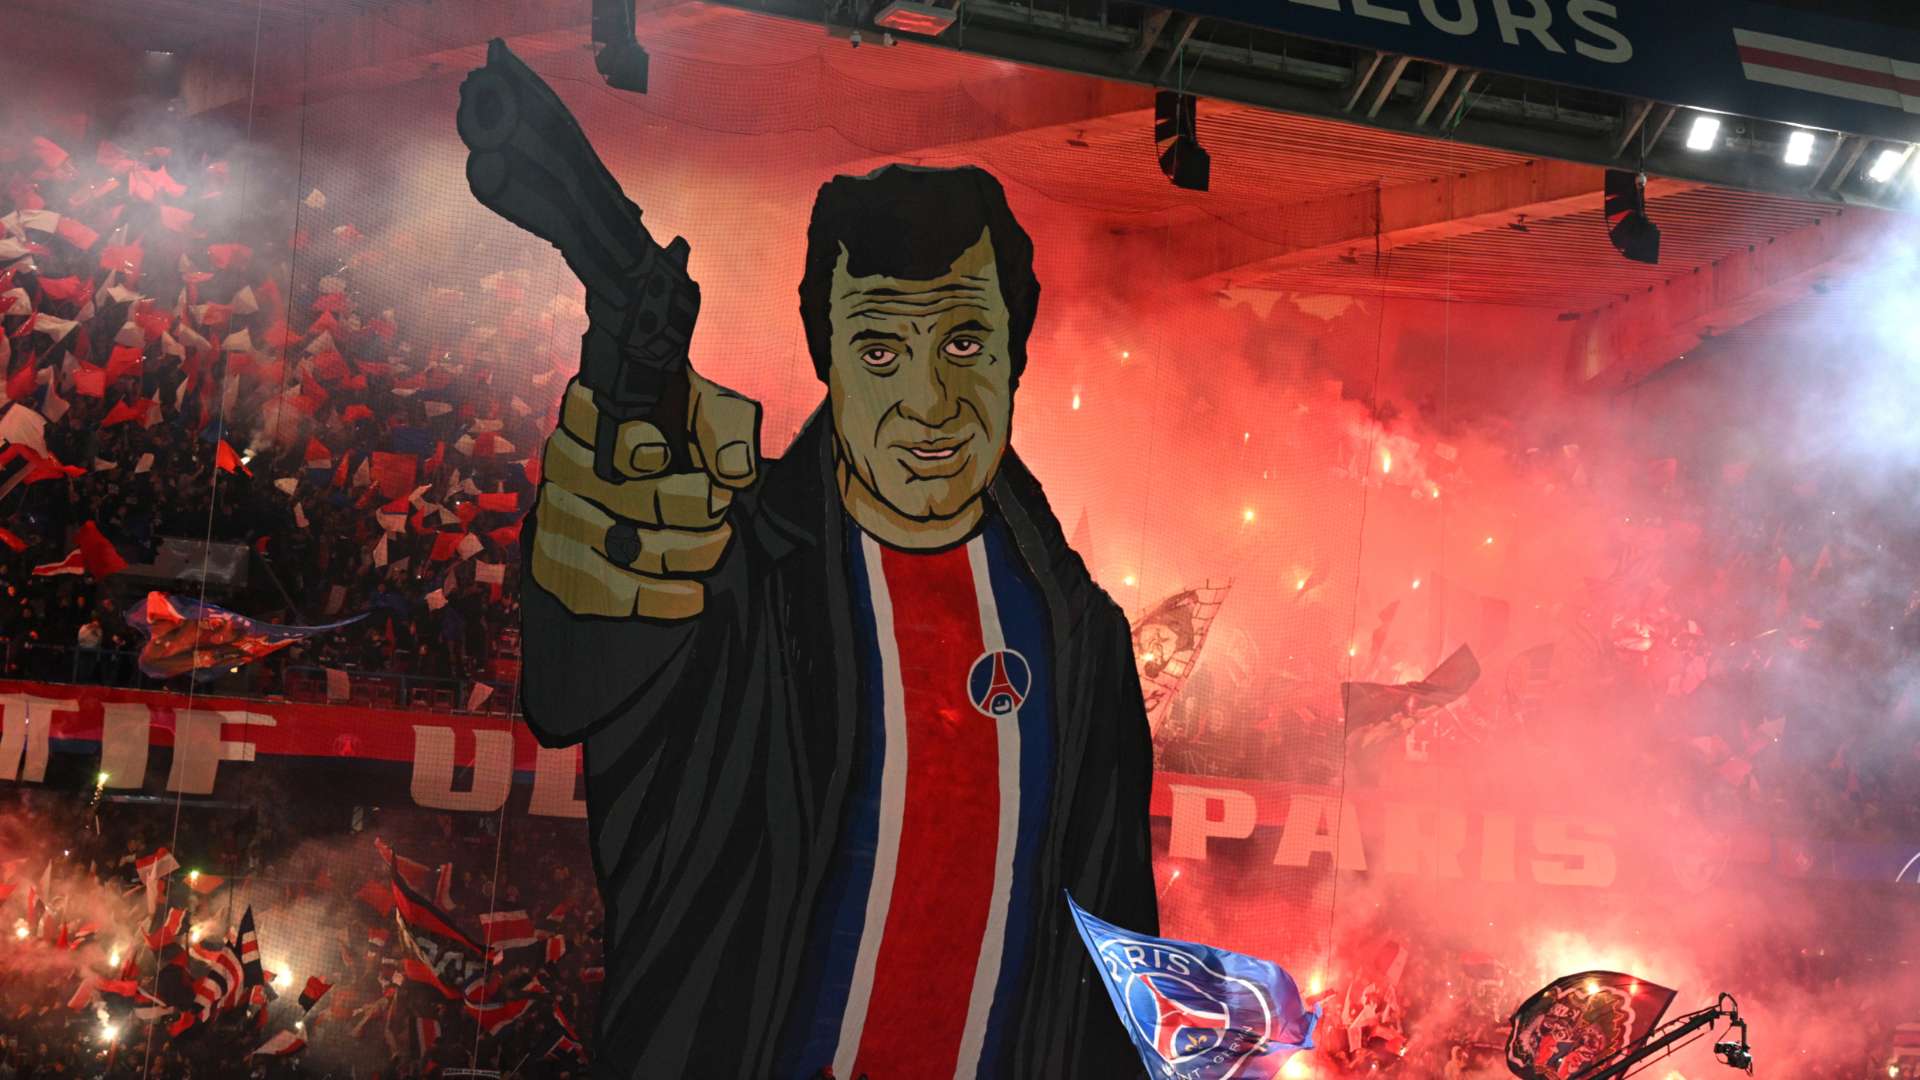 PSG fans supporters